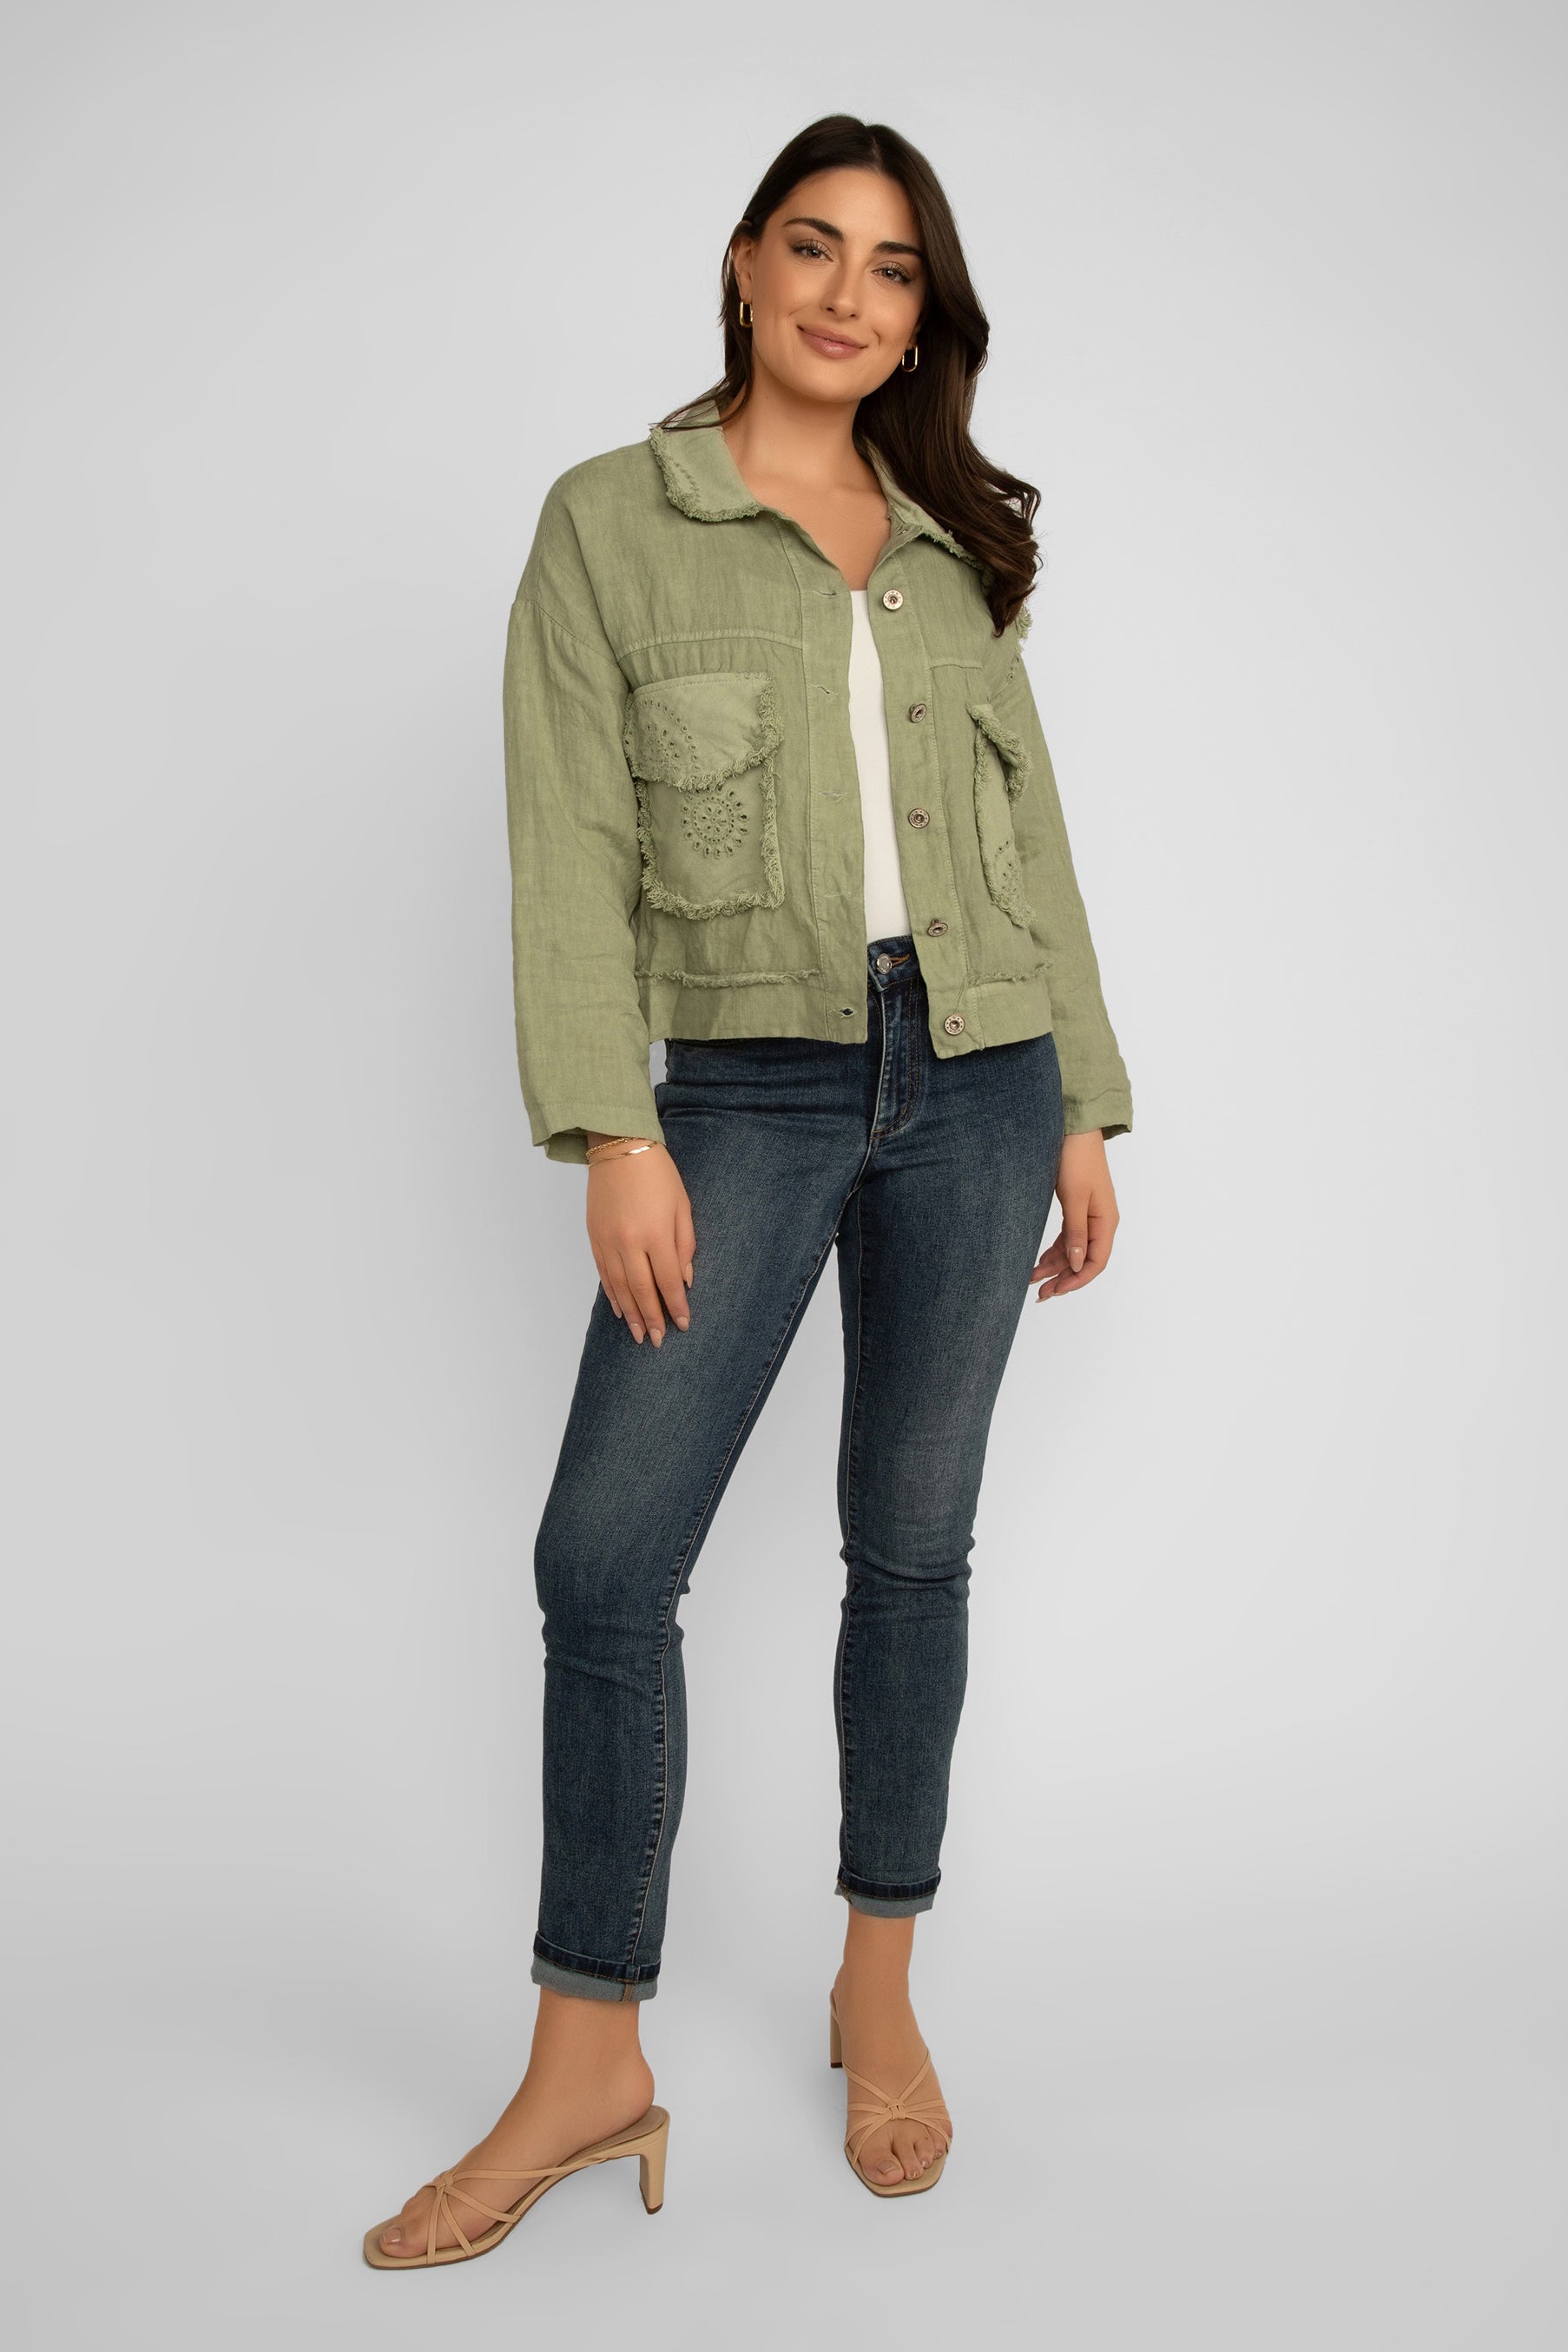 Full body front view of Elissia (NF20493) Women's Long Sleeve Frayed Hem Patch Pocket Jacket with Eyelet Lace Detail in Olive